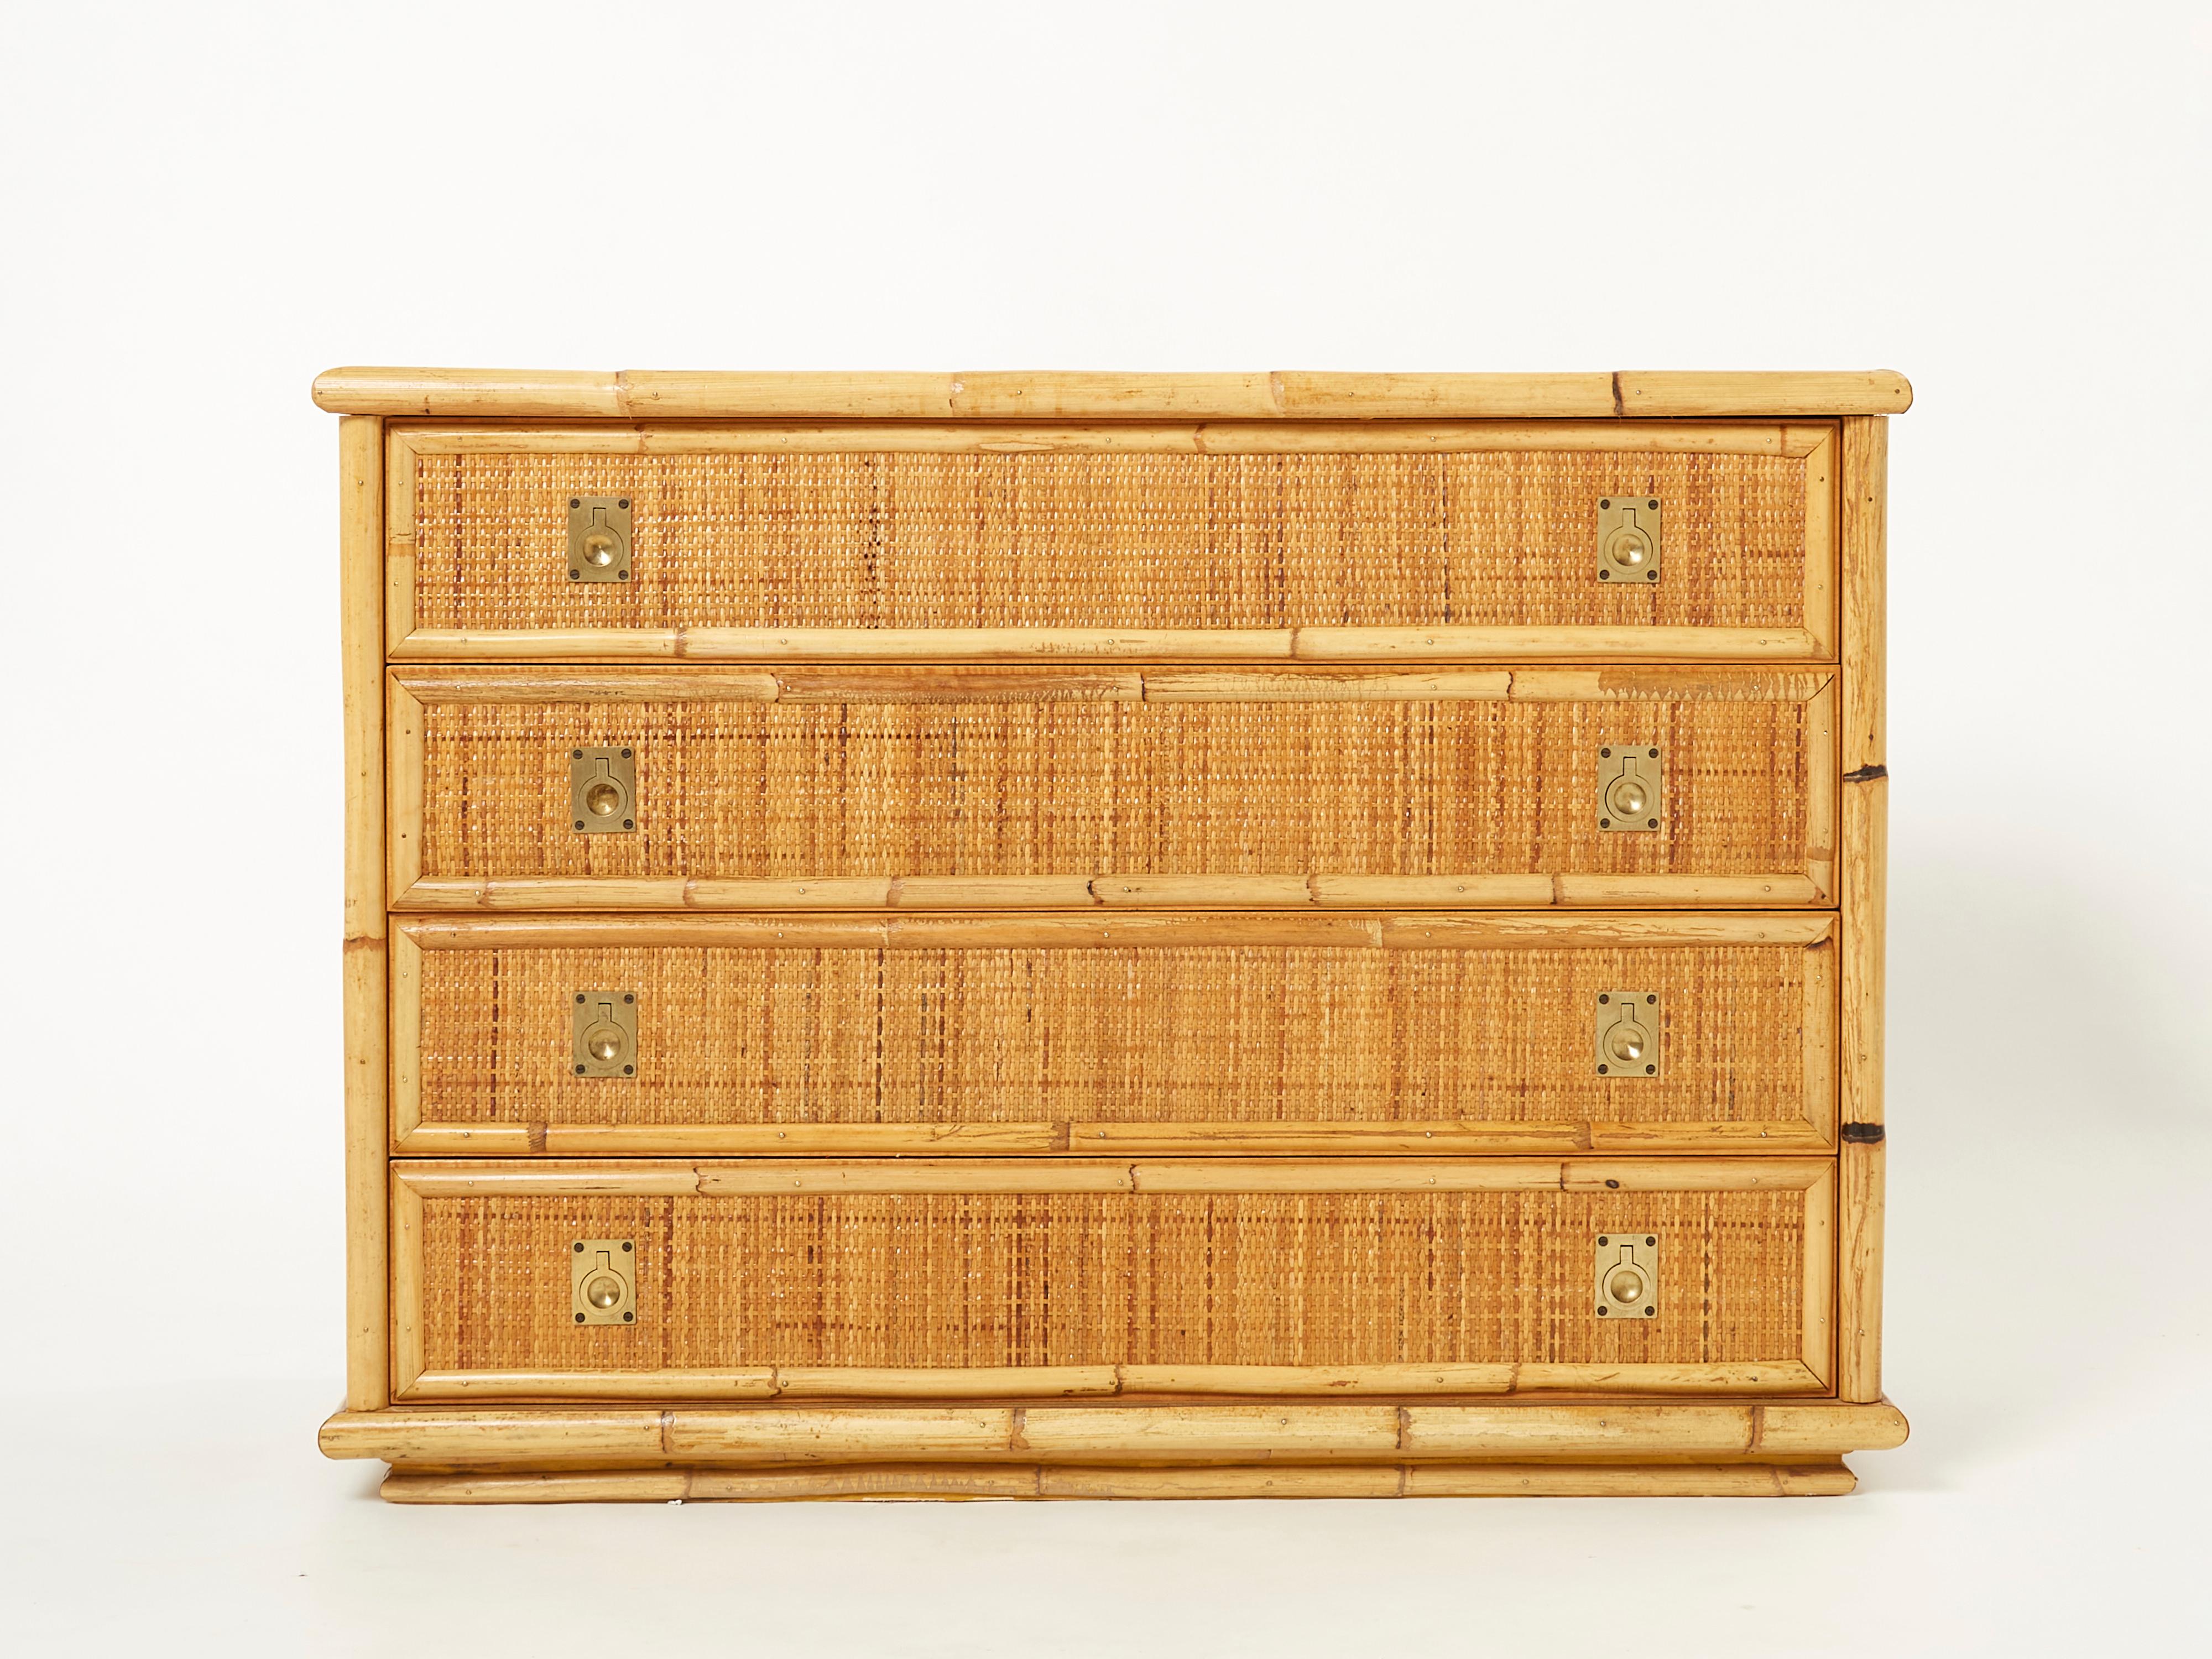 Natural bamboo as the chief material creates a summery, organic aesthetic in this 1970’s commode chest of drawers, while bright brass handles are strong, adding eye-catching touches. The brass handles on the drawers are lovely examples of